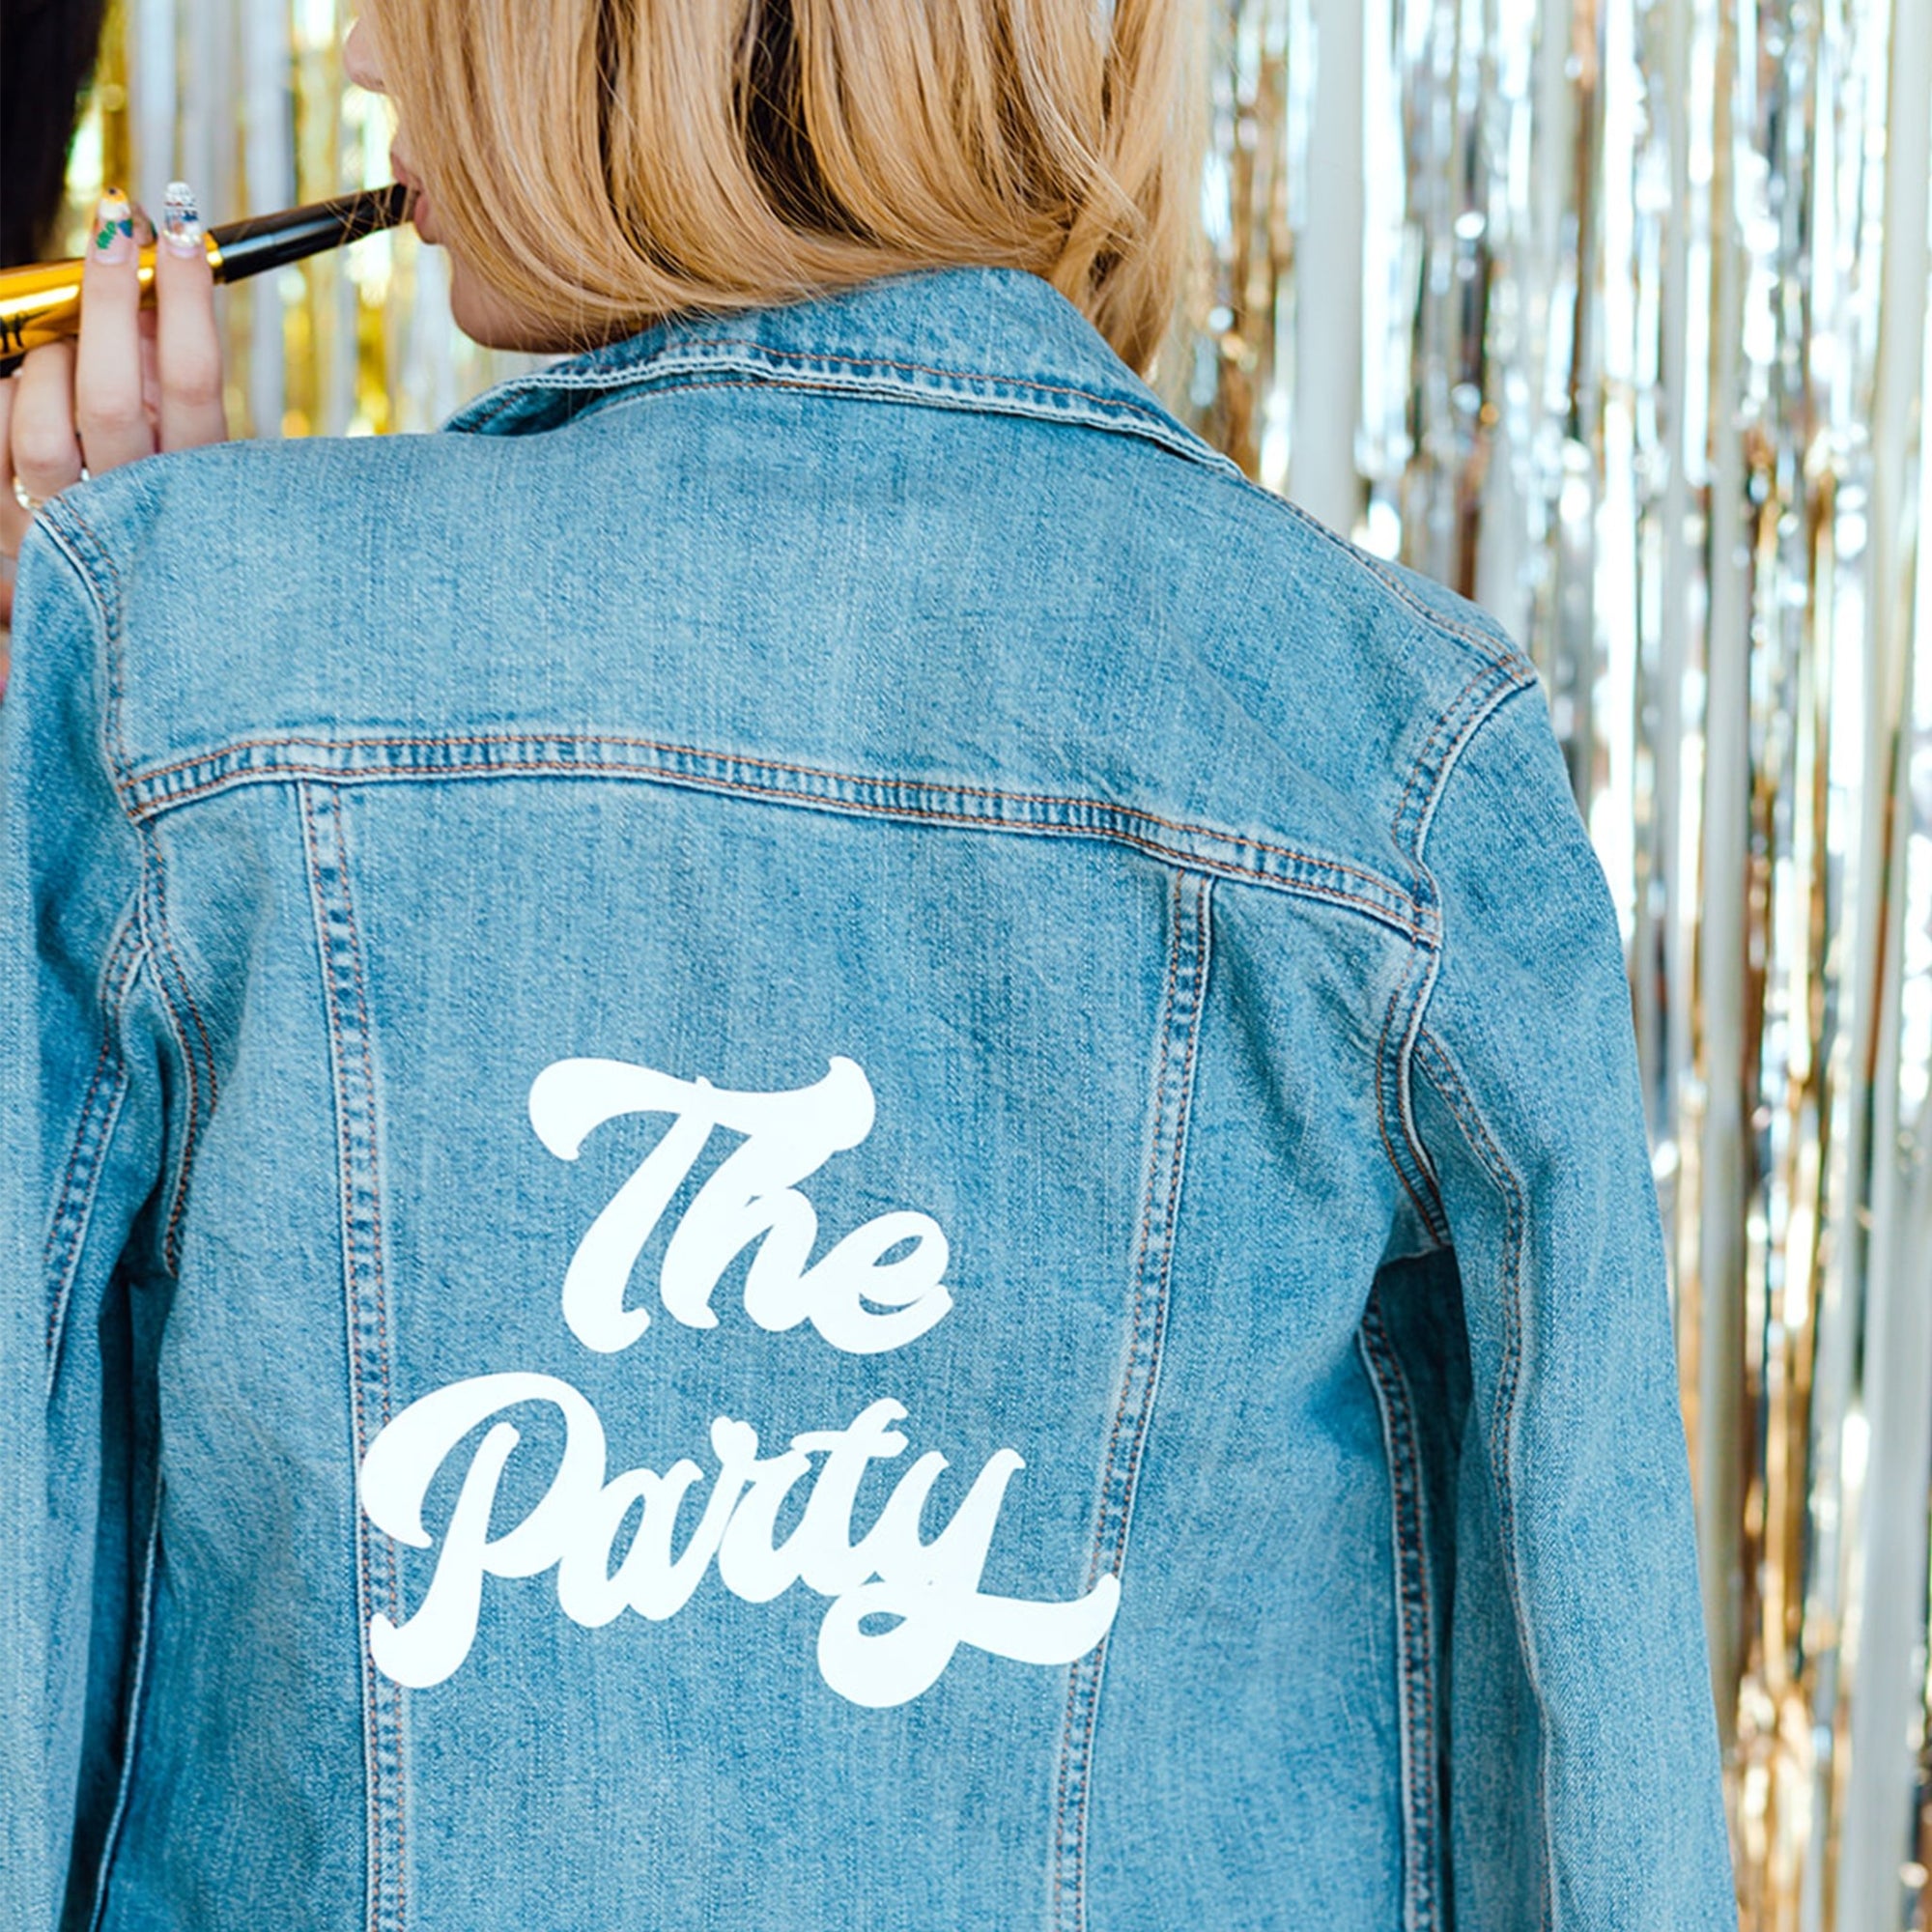 A woman wears a customized jean jacket that says "The Party" in white.